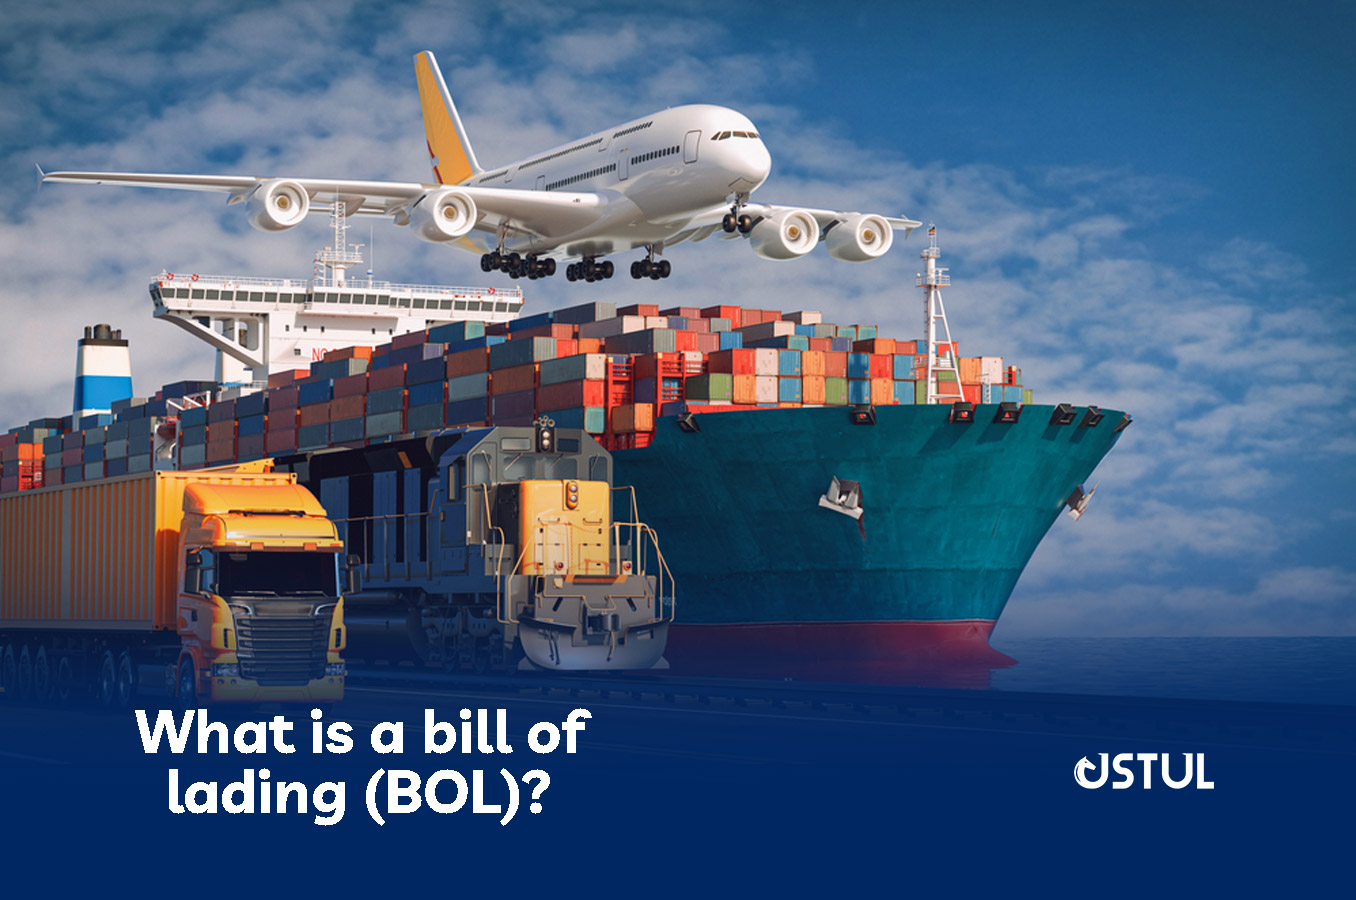 What Is a Bill of Lading (BOL)?